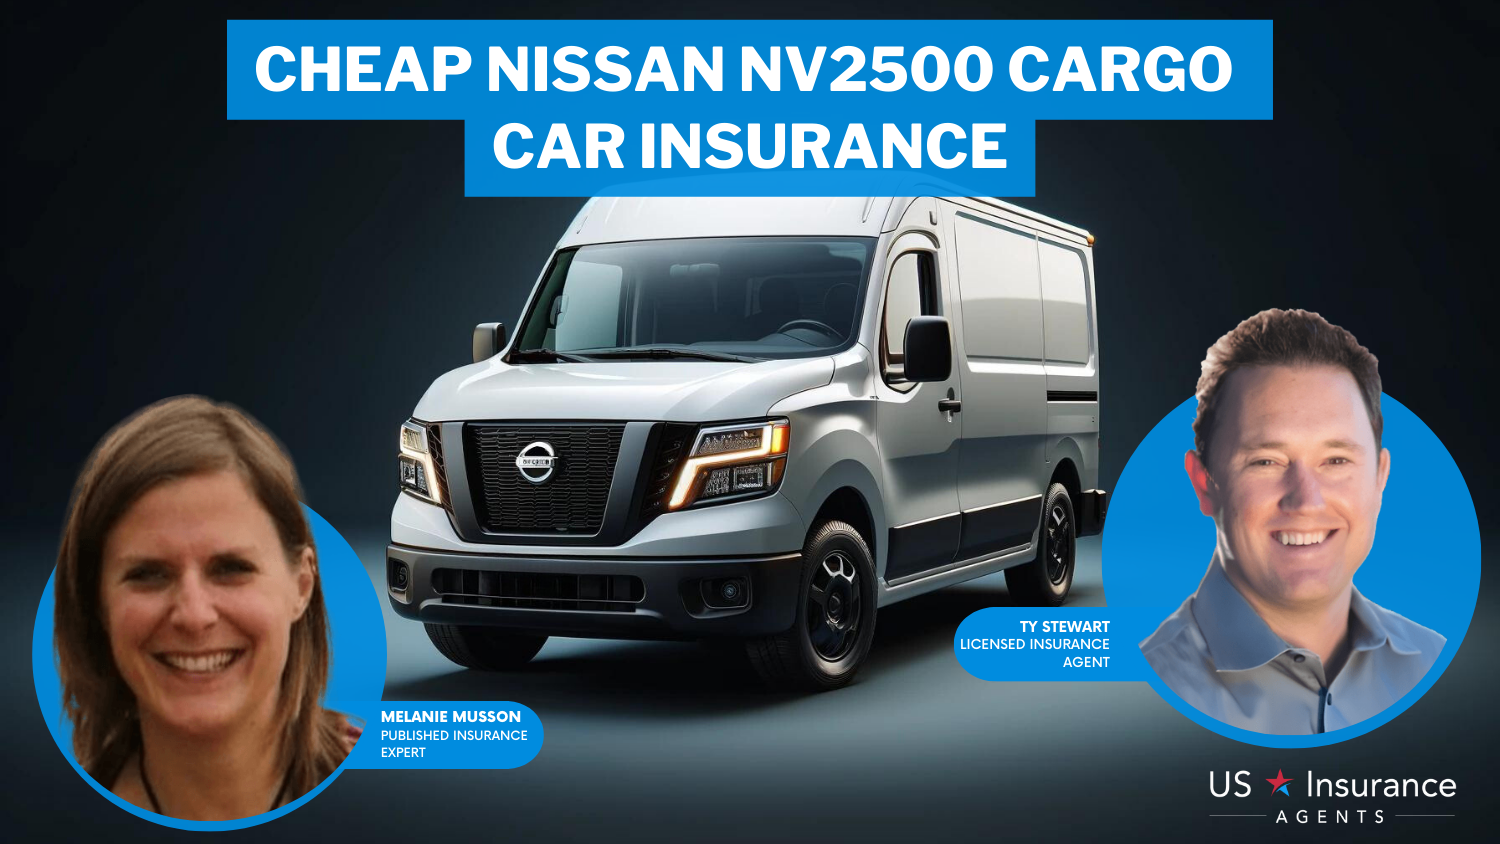 Cheap Nissan NV2500 Cargo Car Insurance: Allstate, The Hartford, and Travelers